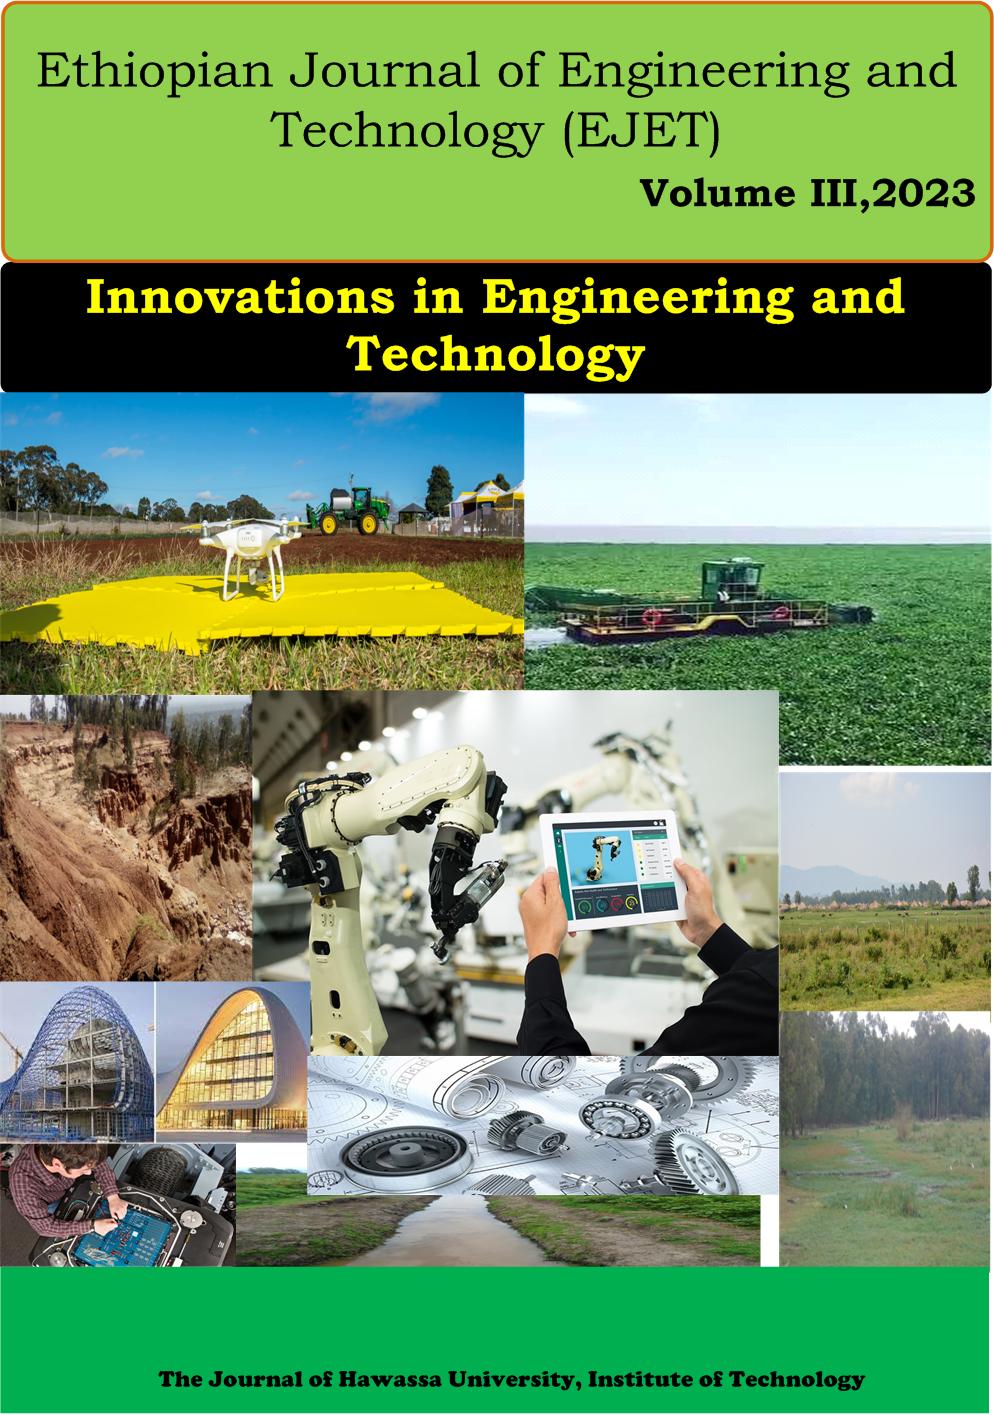 					View Vol. 3 No. 1 (2023): Innovations in Engineering and Technology
				